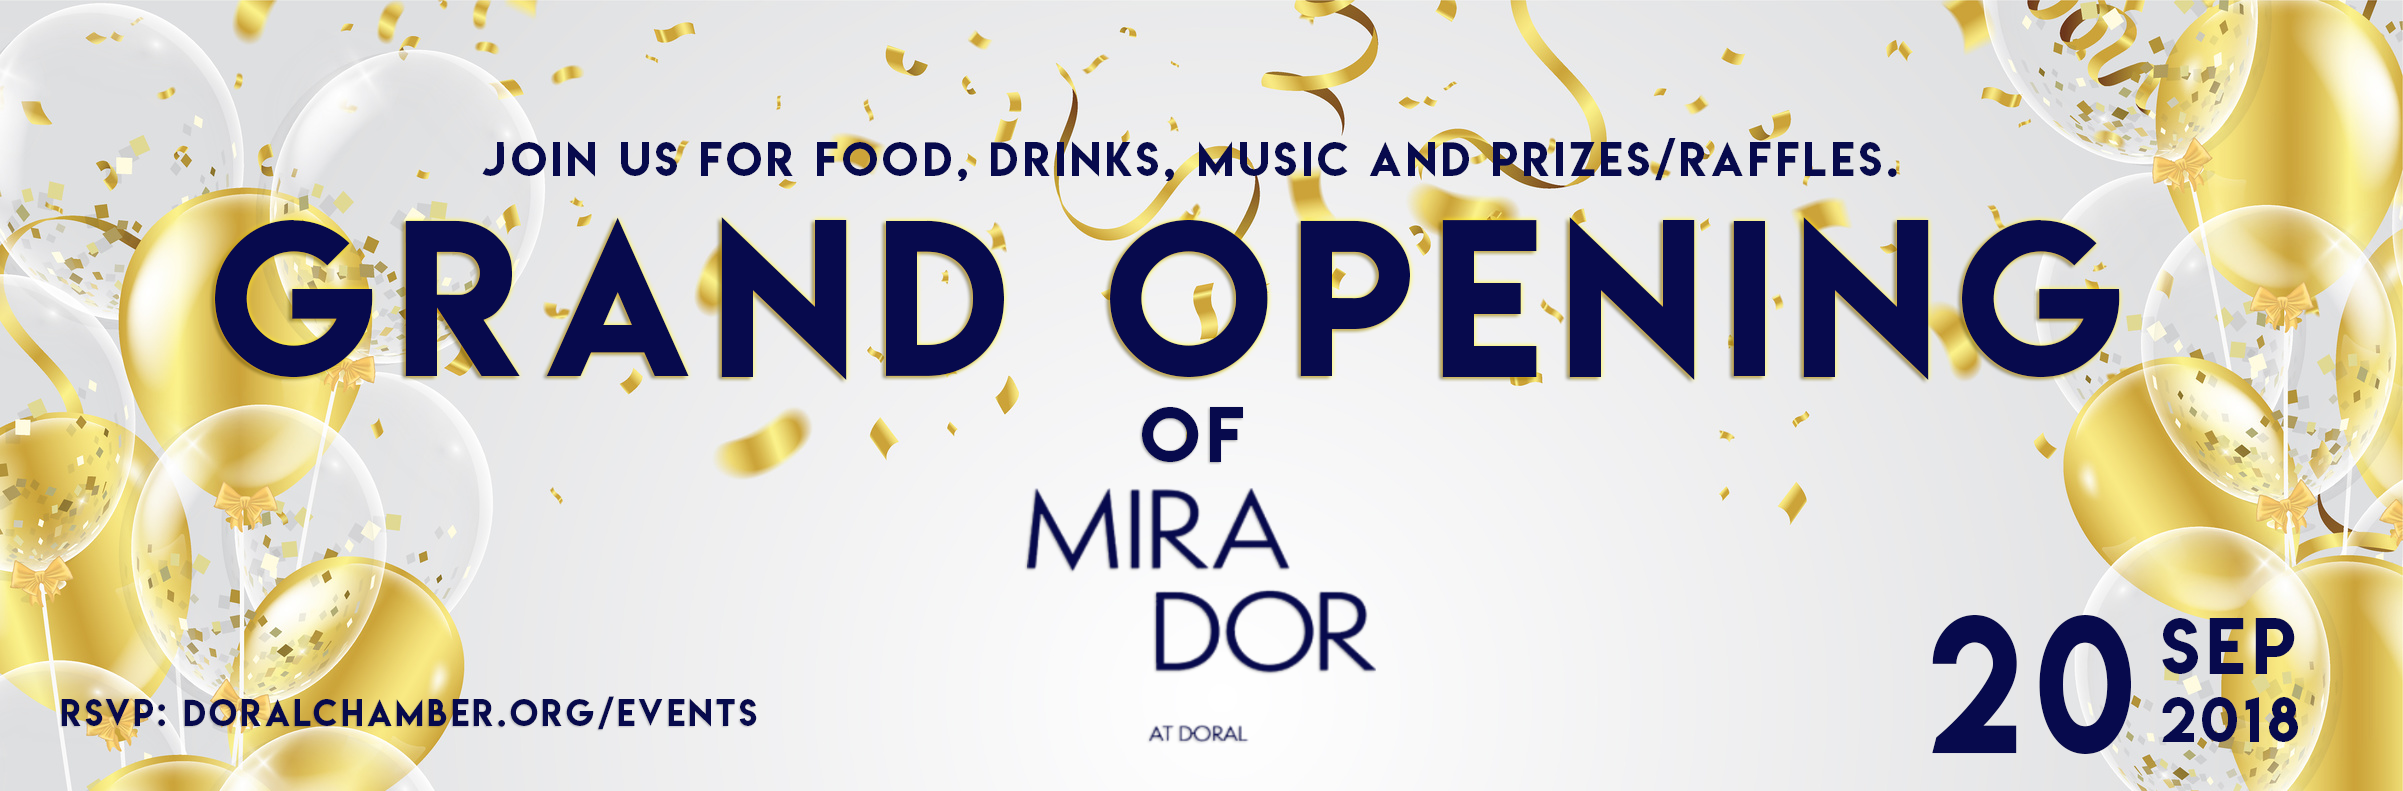 Mirador Grand Opening, a Doral Chamber of Commerce event.